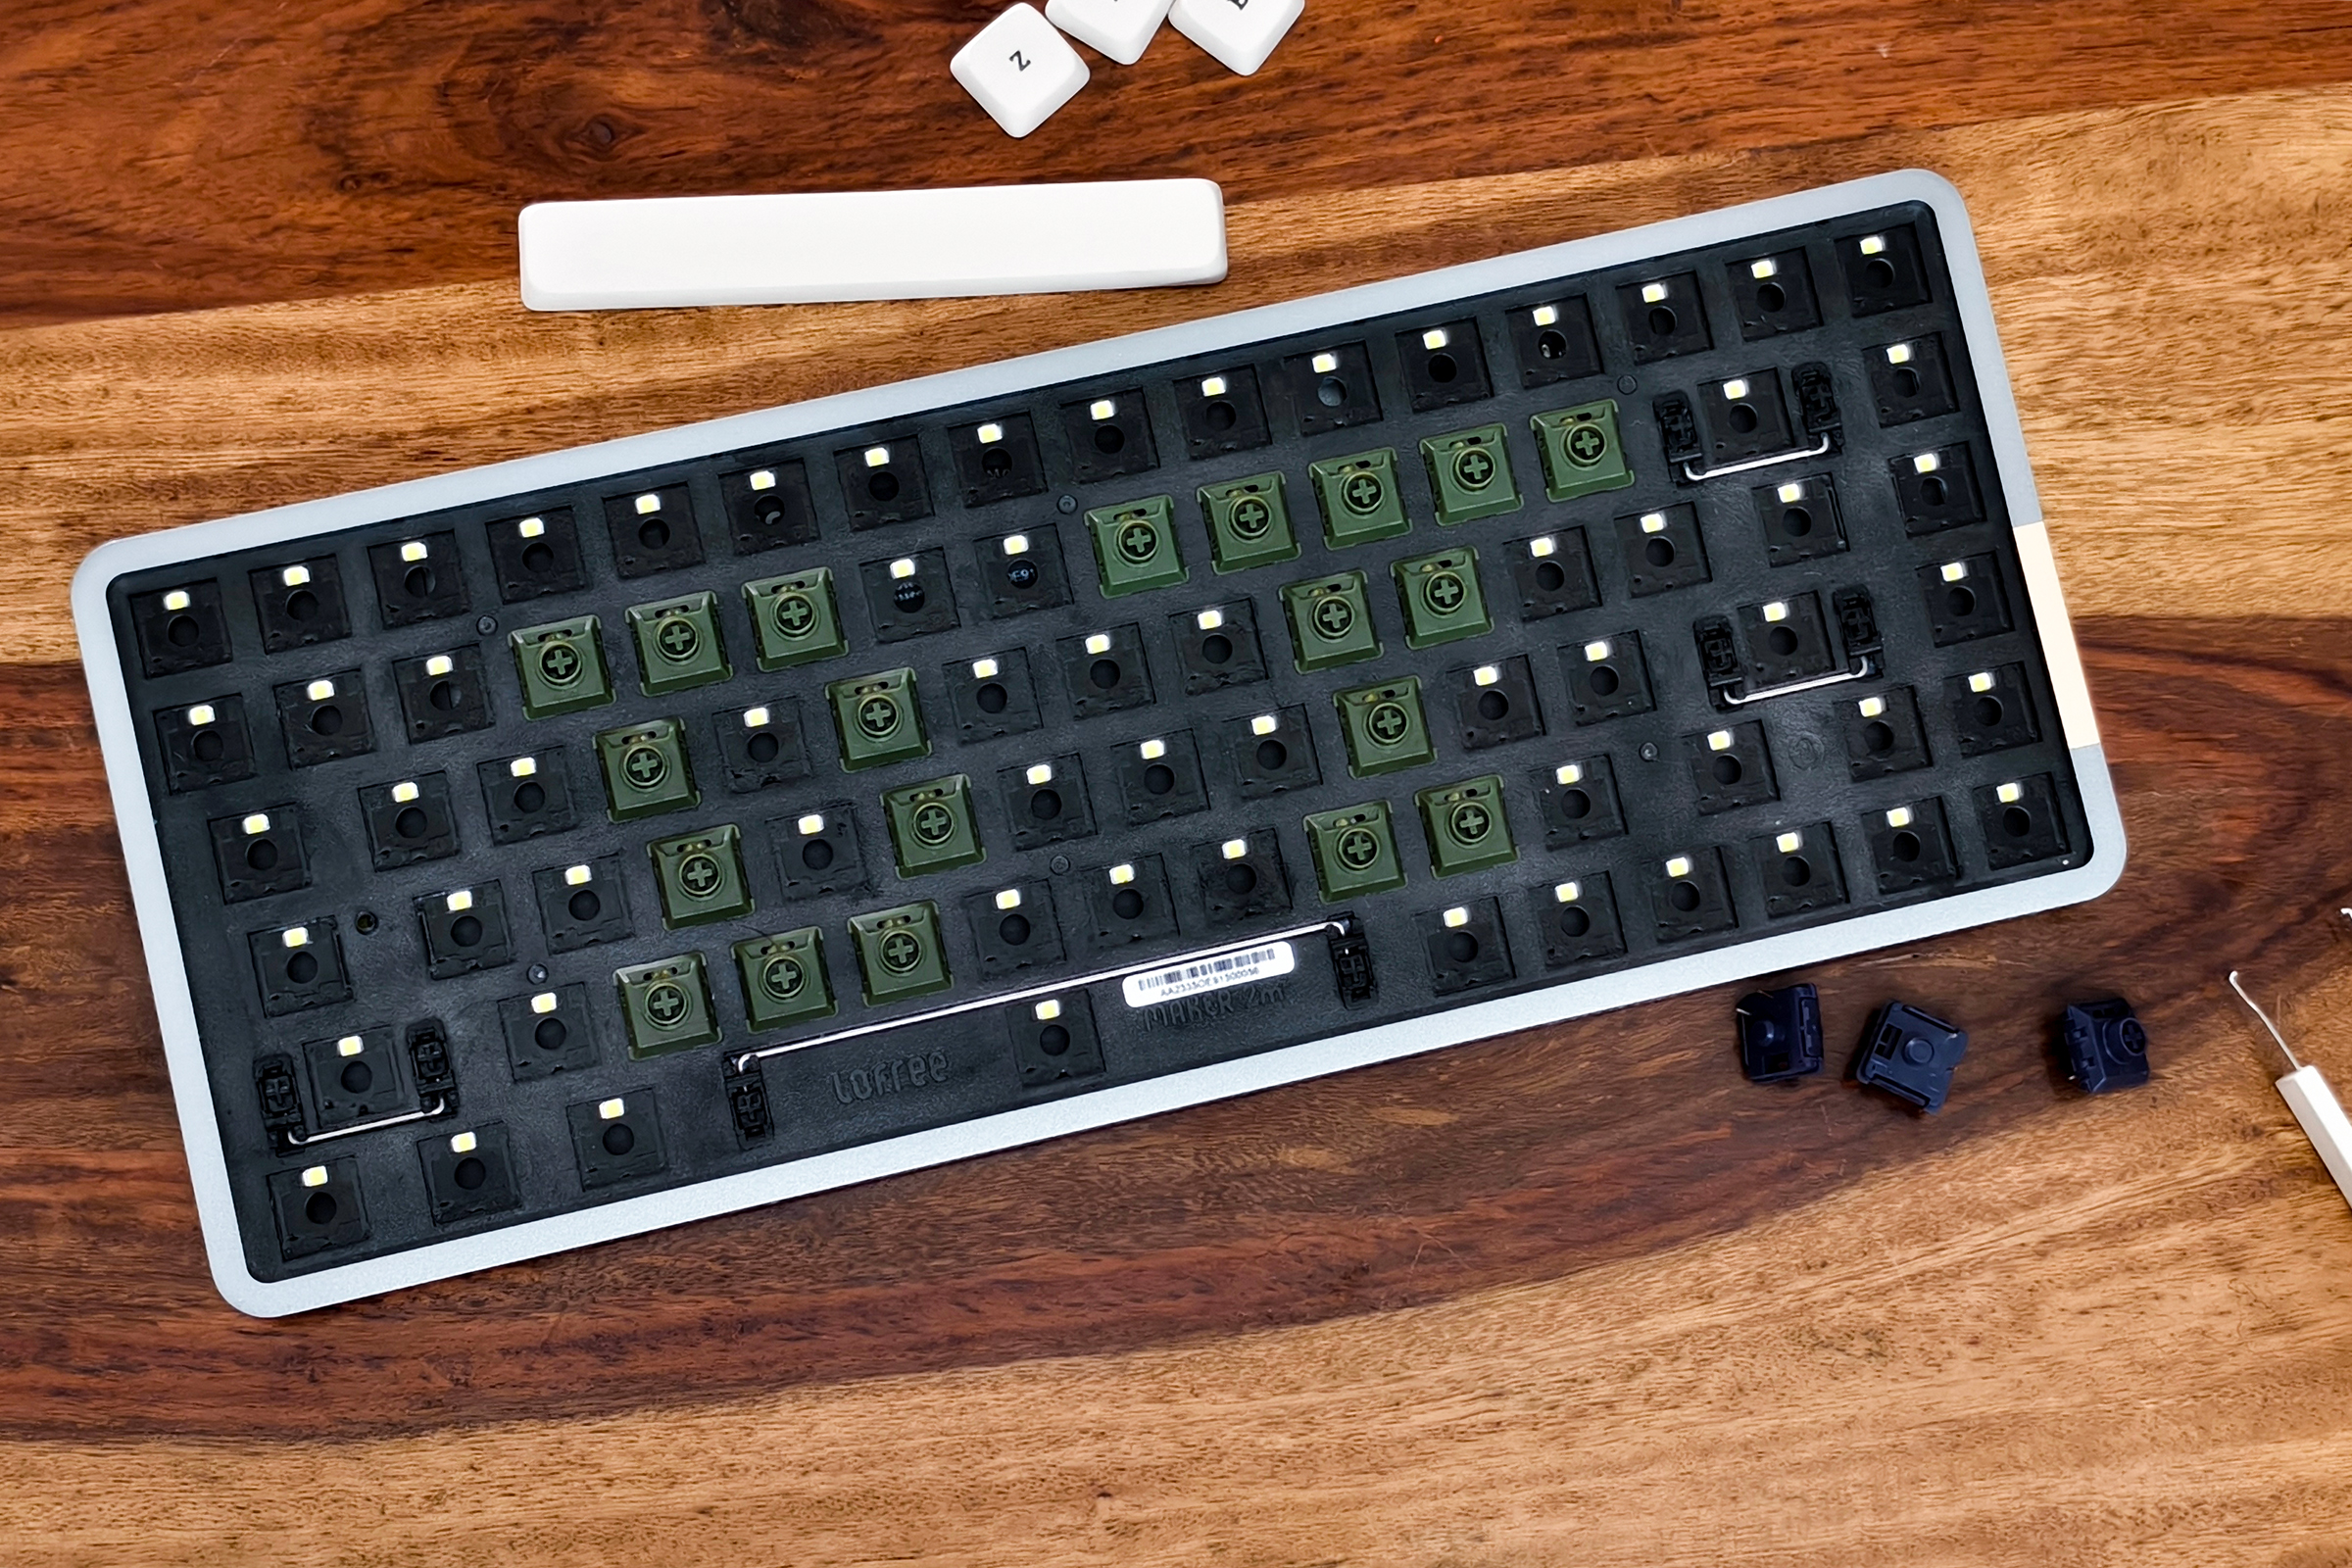 Lofree Flow review: This low-profile keyboard changed me | Digital